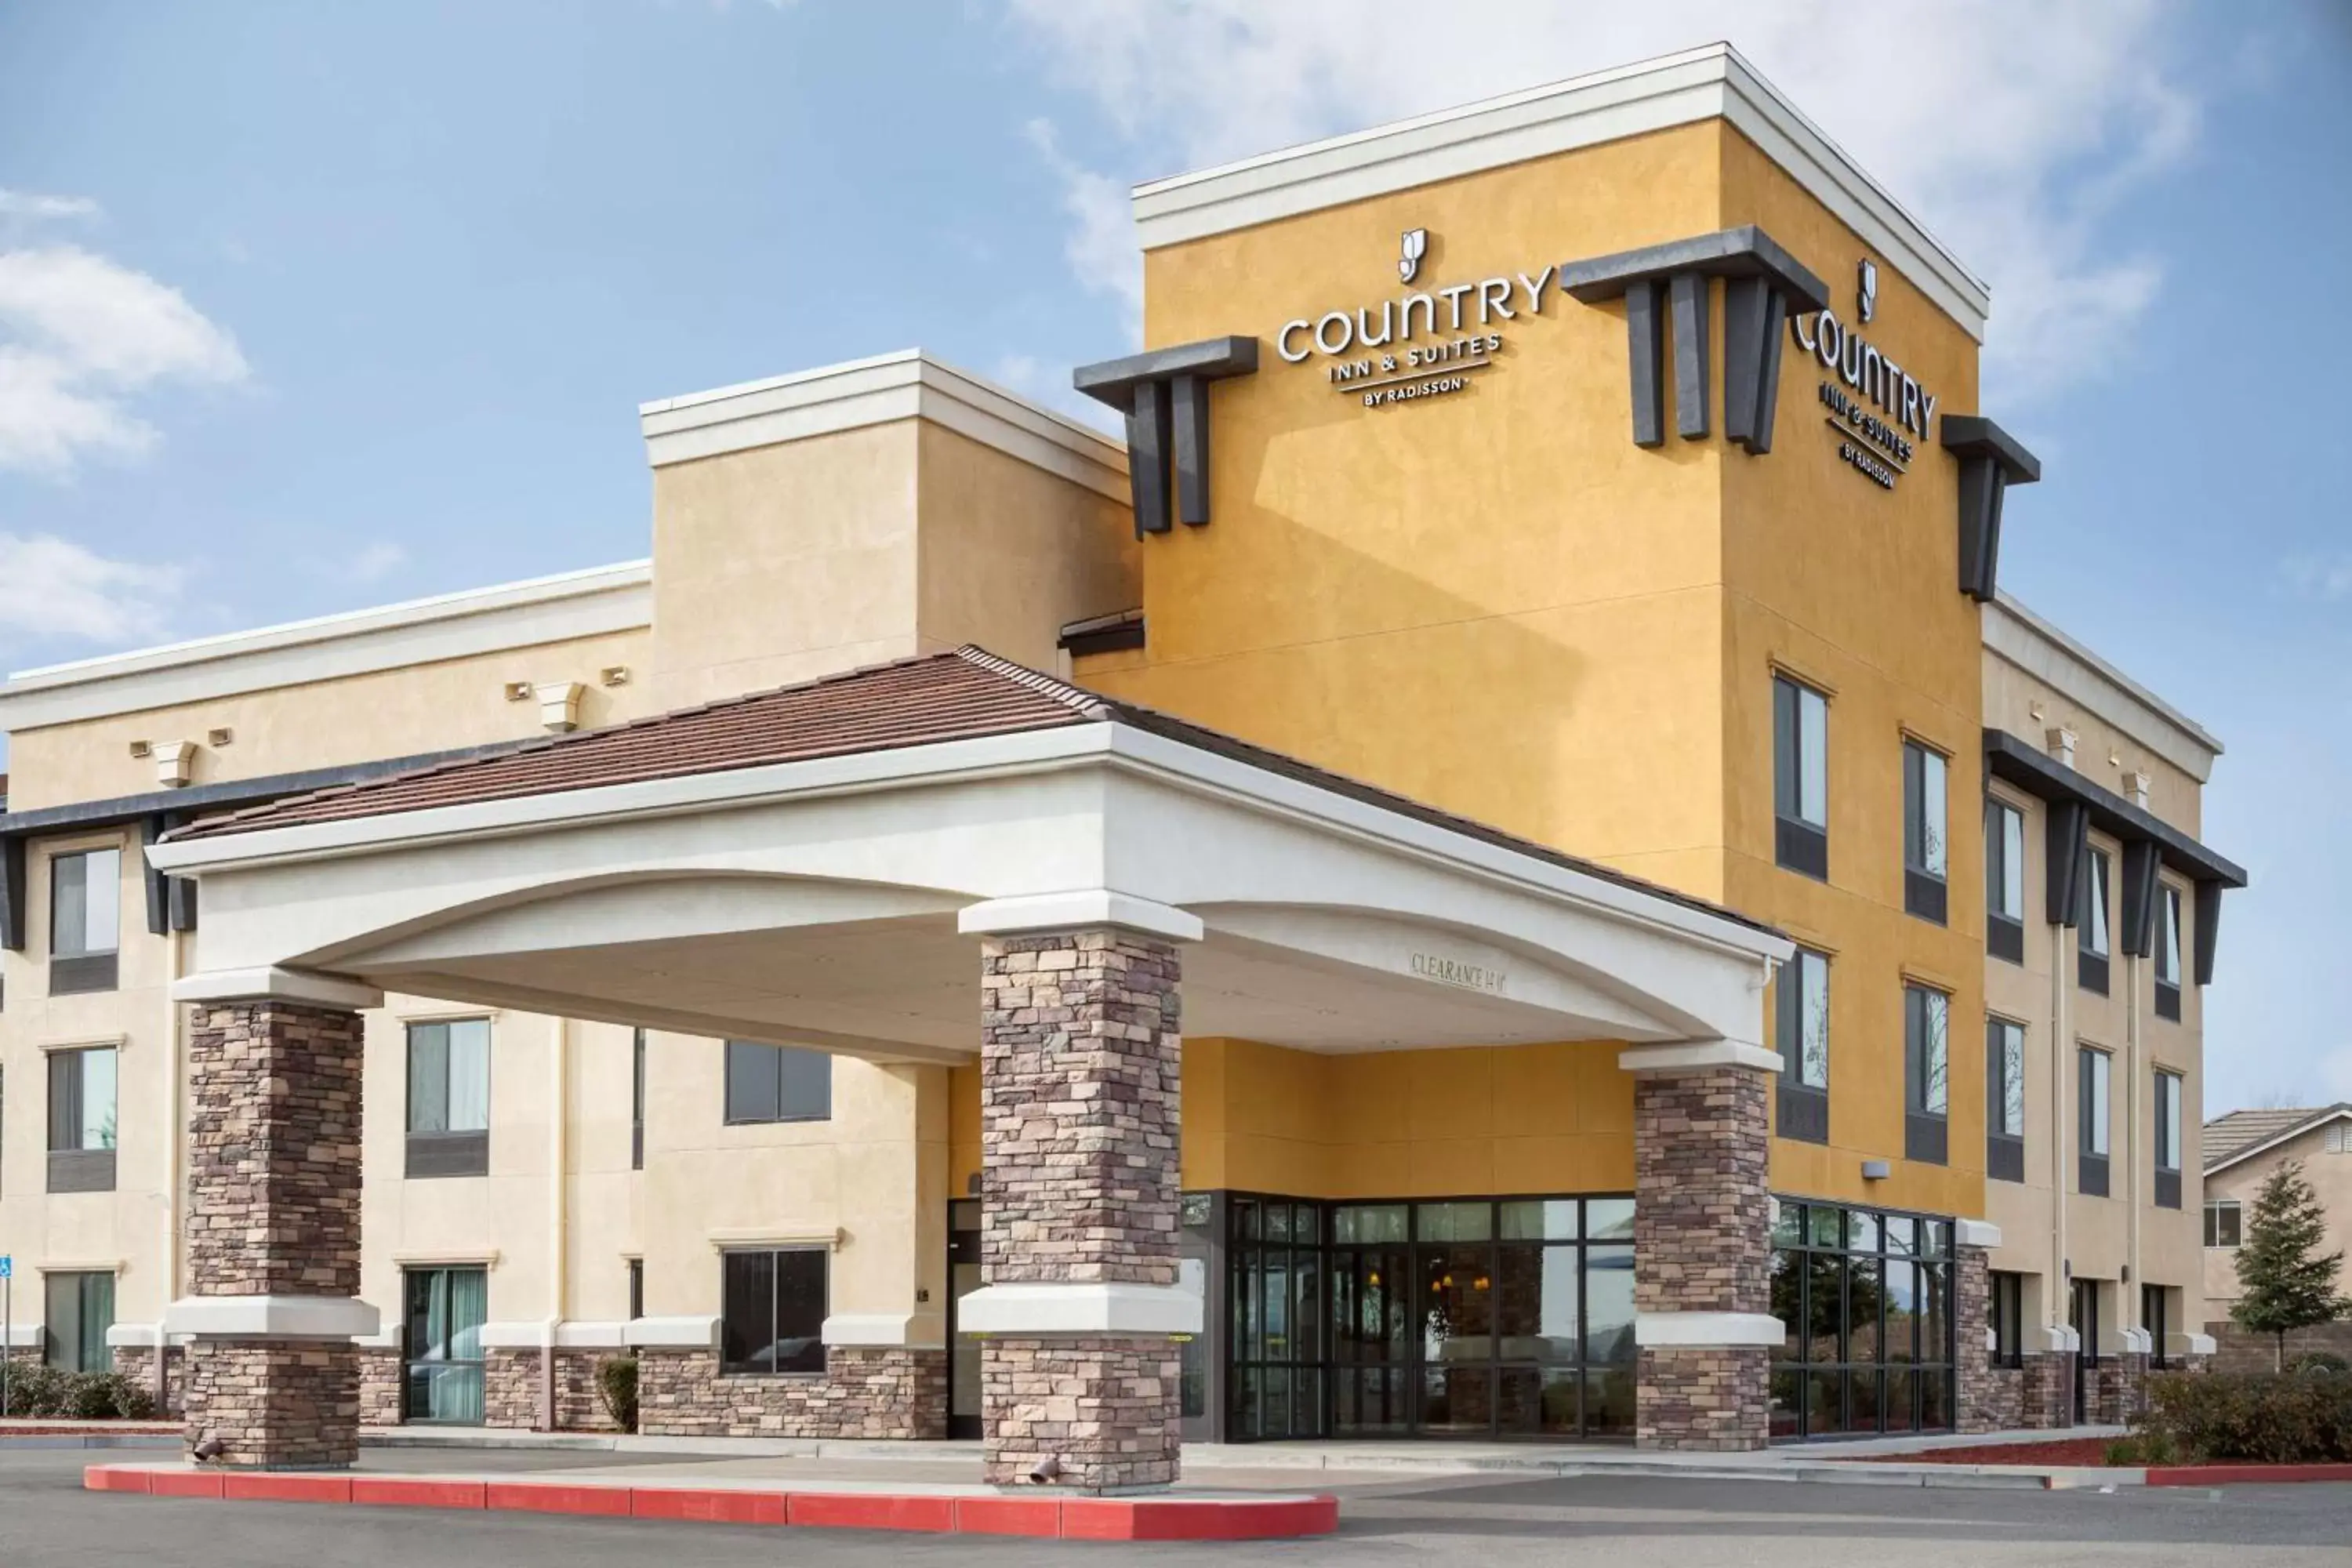 Property building in Country Inn & Suites by Radisson, Dixon, CA - UC Davis Area